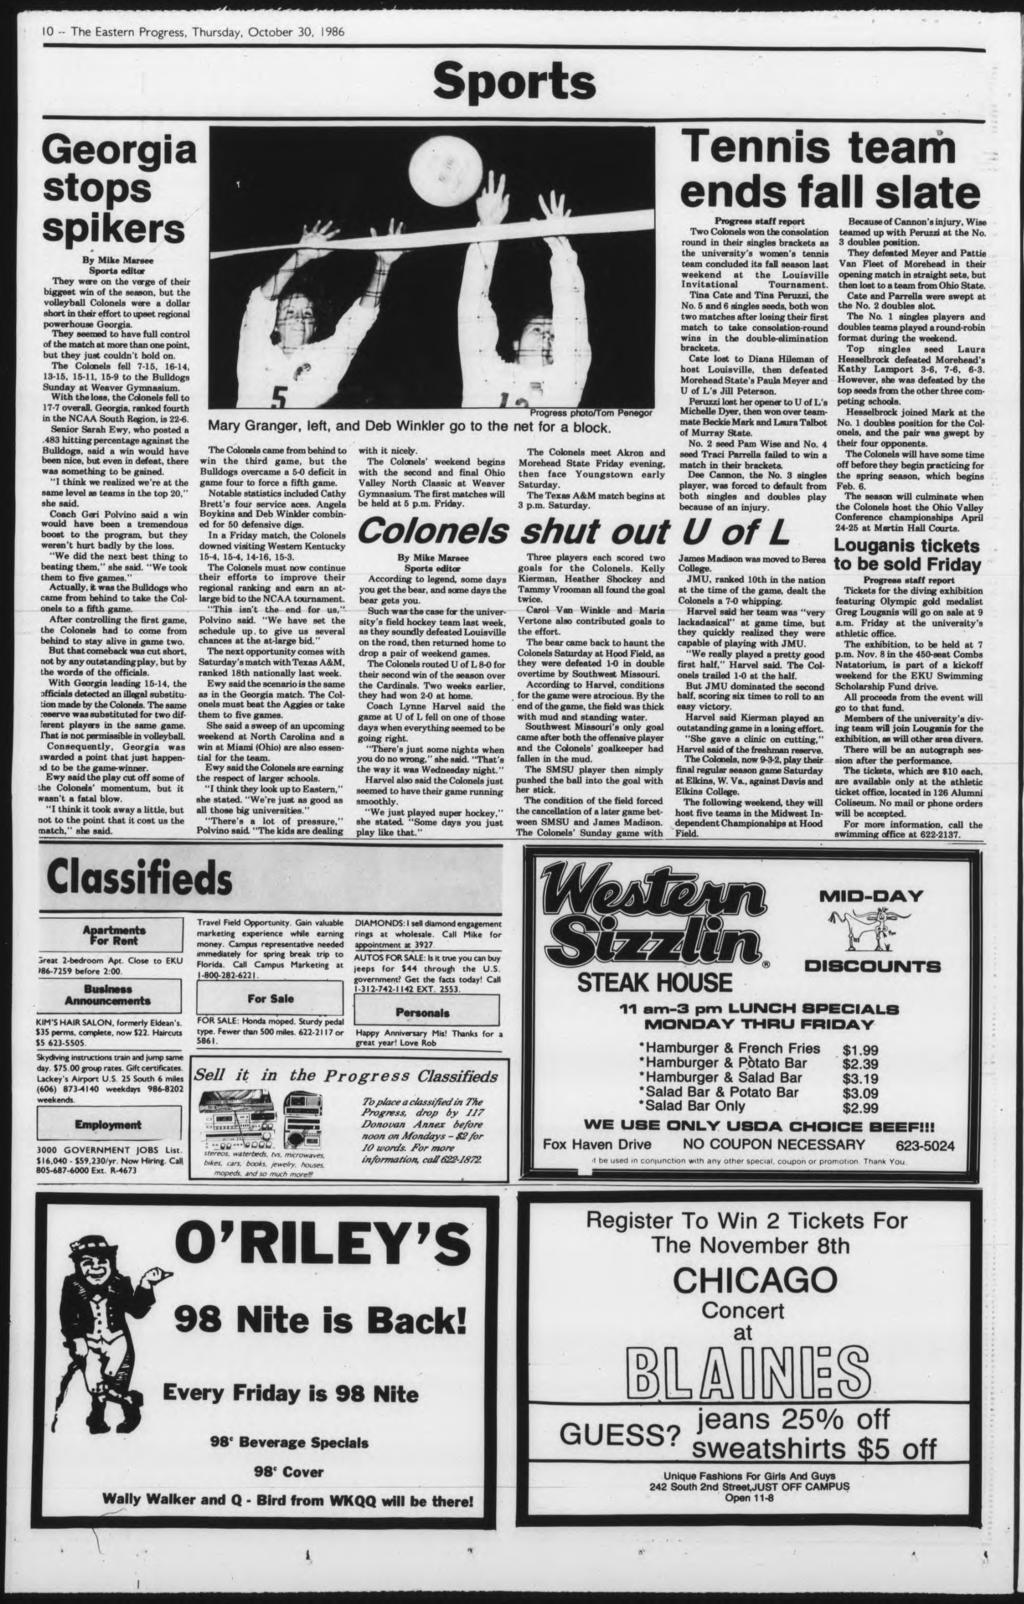 10 -- The Eastern Progress, Thursday, October 30, 1986 Georga stops spkers By MkeMaraee Sports edtor They were on the verge of ther bggest wn of the season, but the volleyball Colonels were a dollar